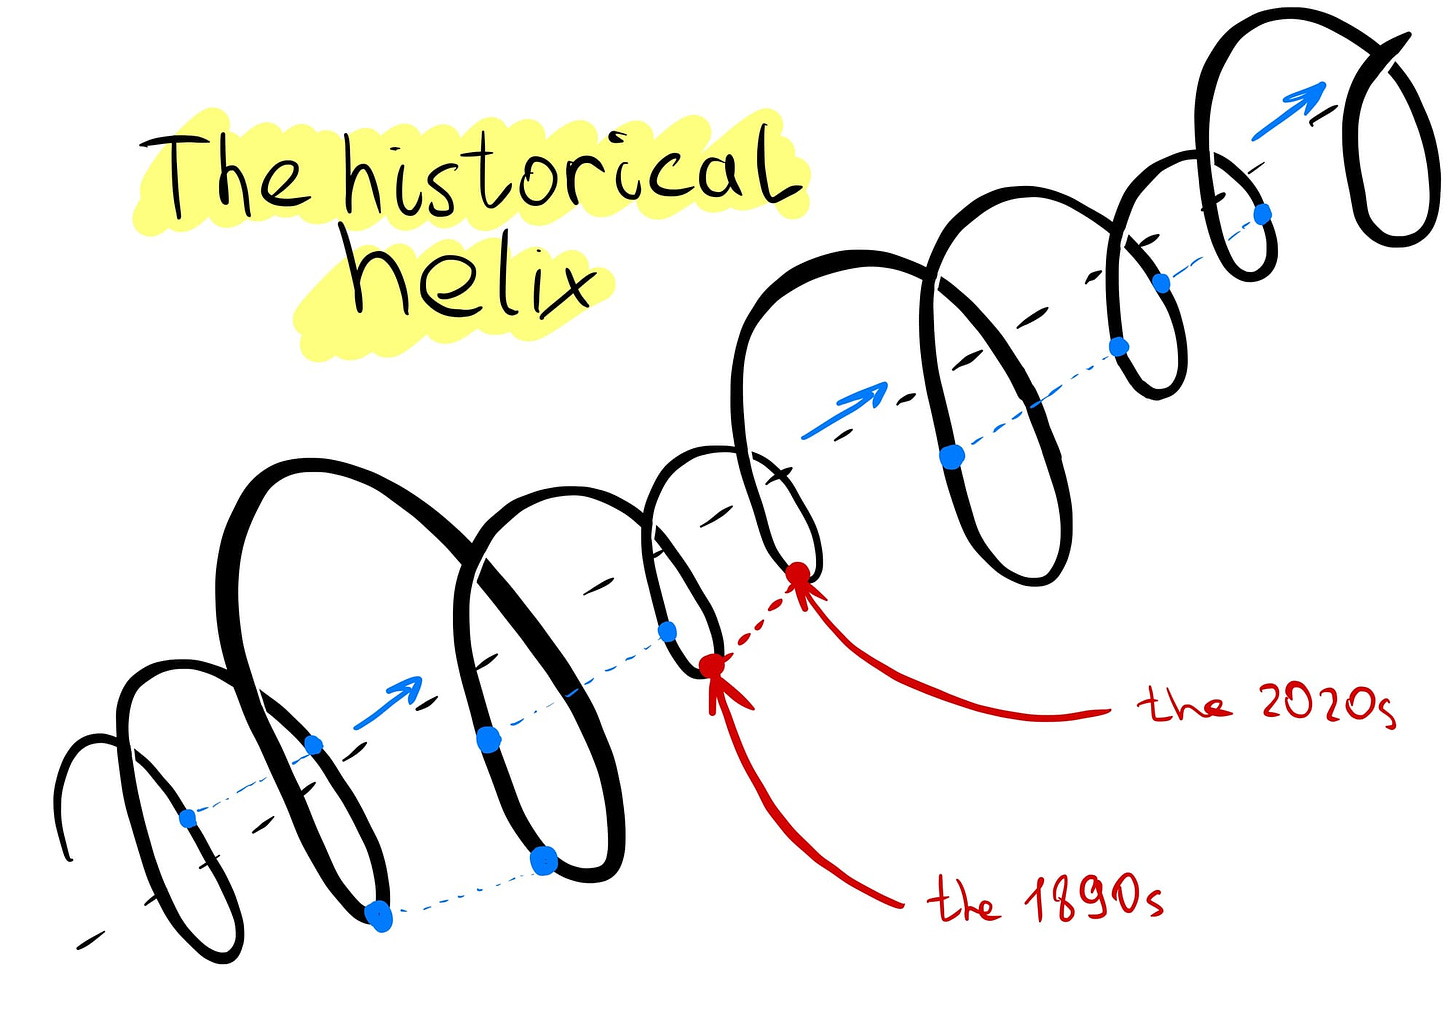 A sketch of the historical helix